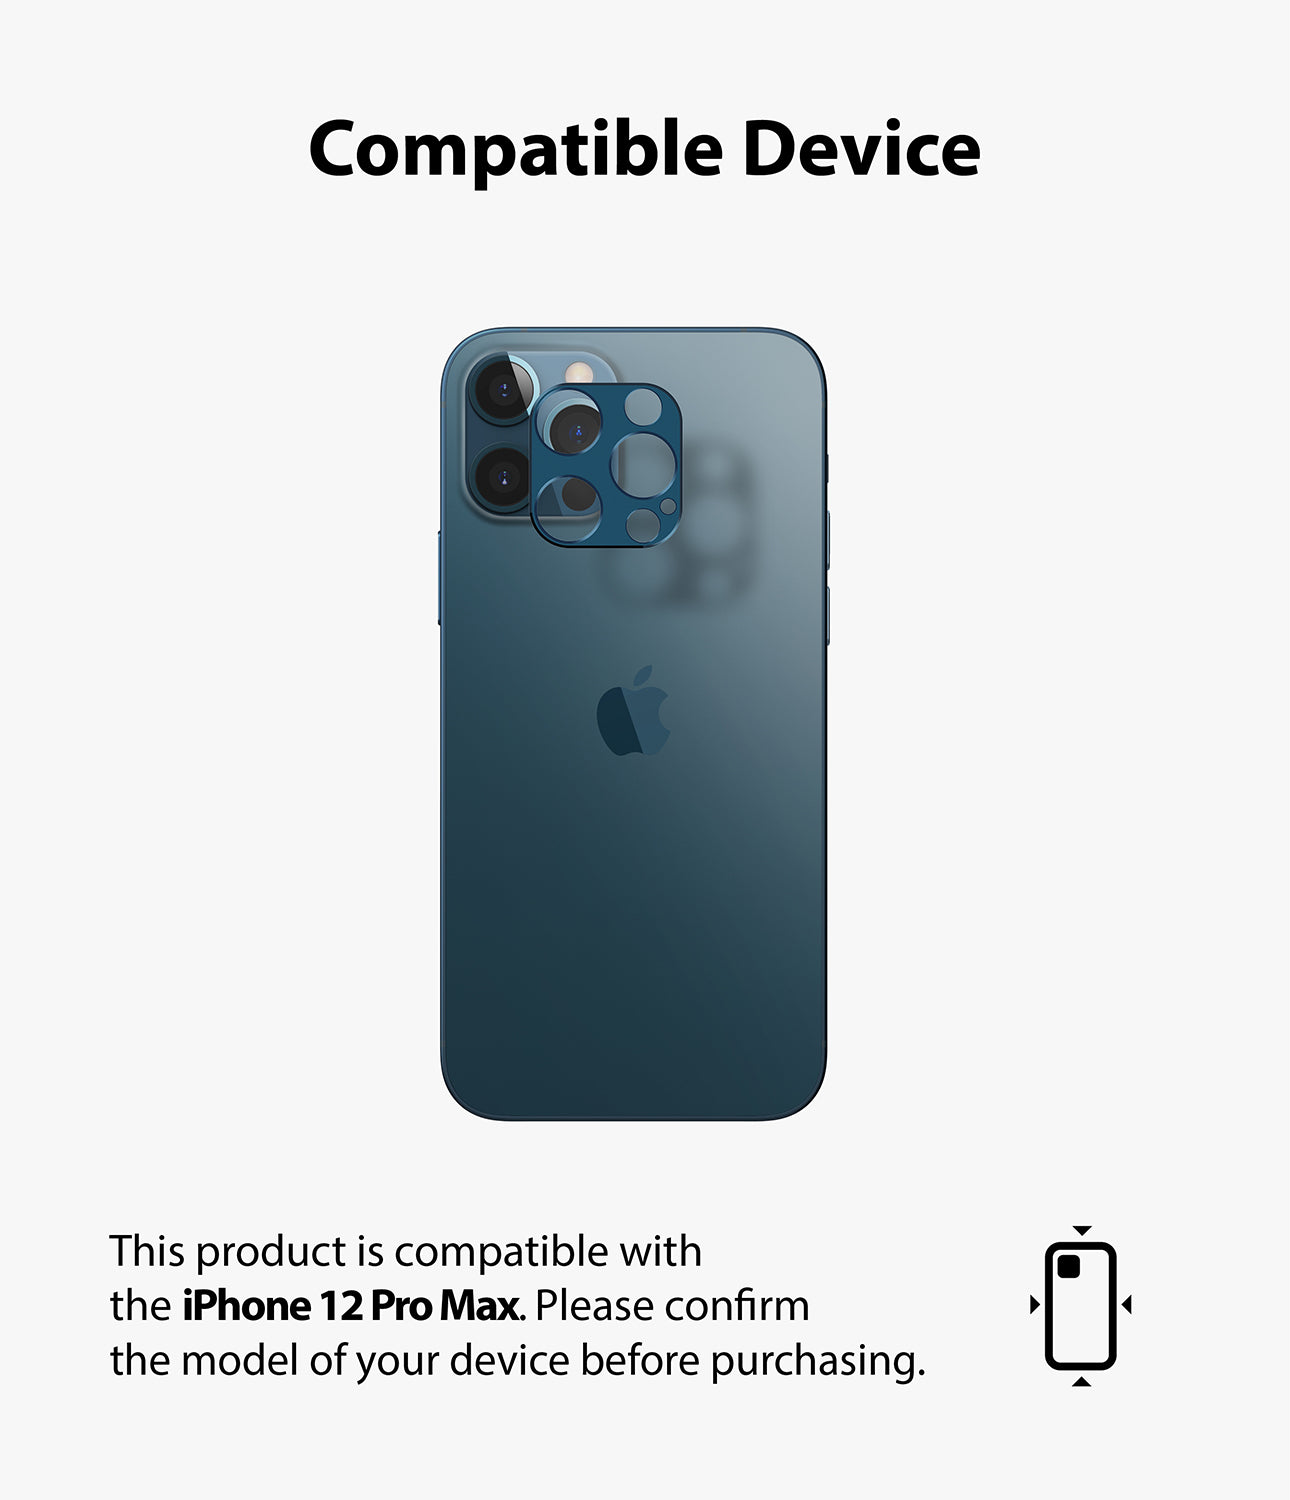 only compatible with iphone 12 pro max